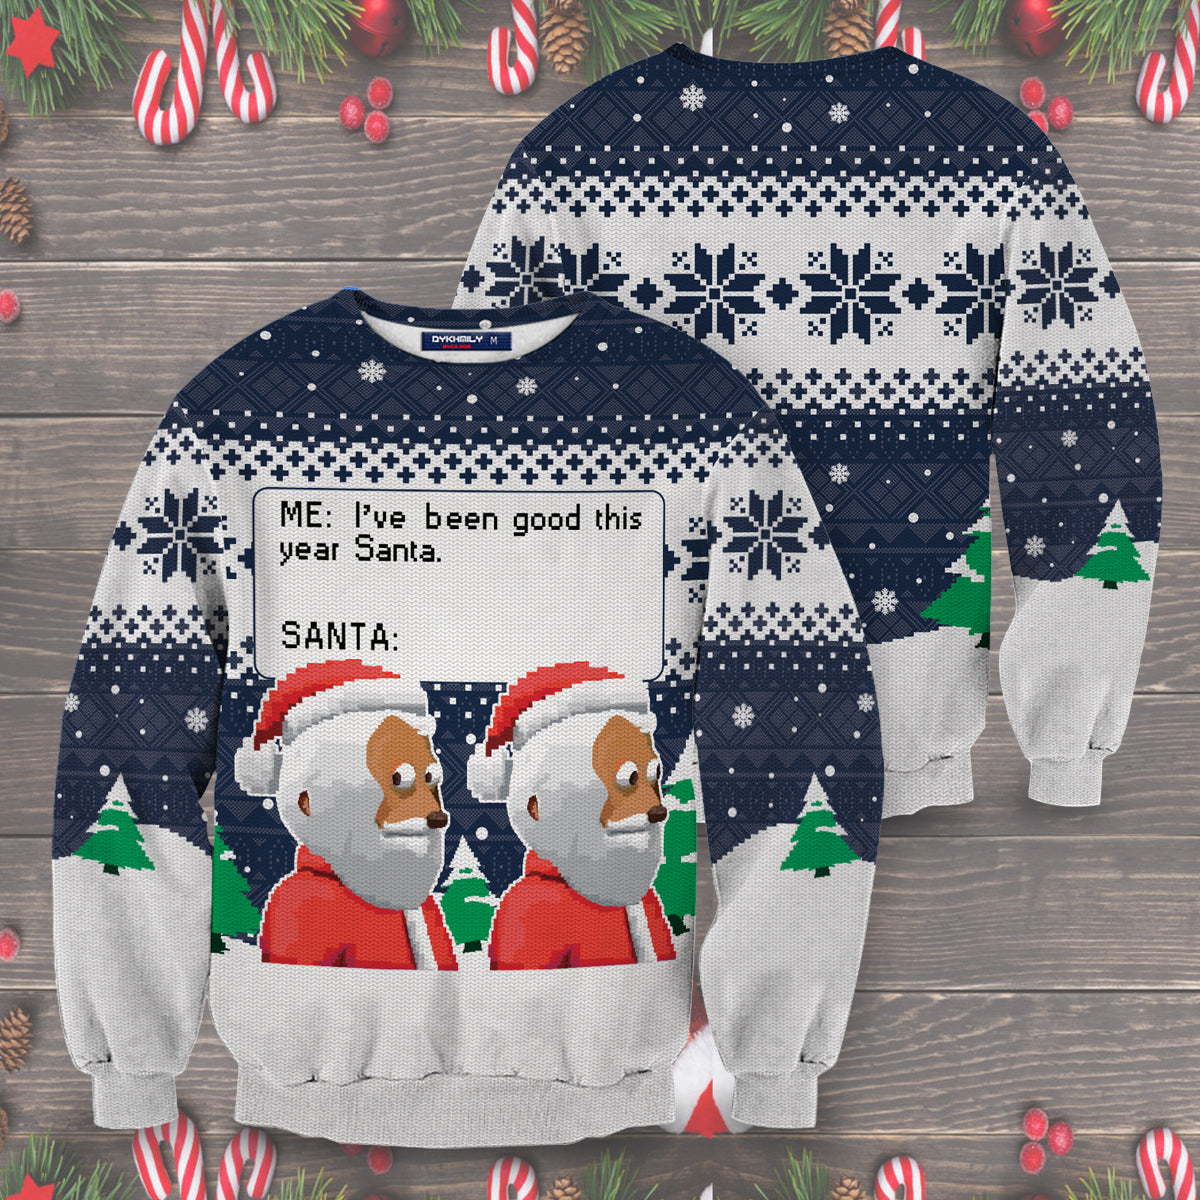 I've Been Good This Year Santa Unisex Sweater